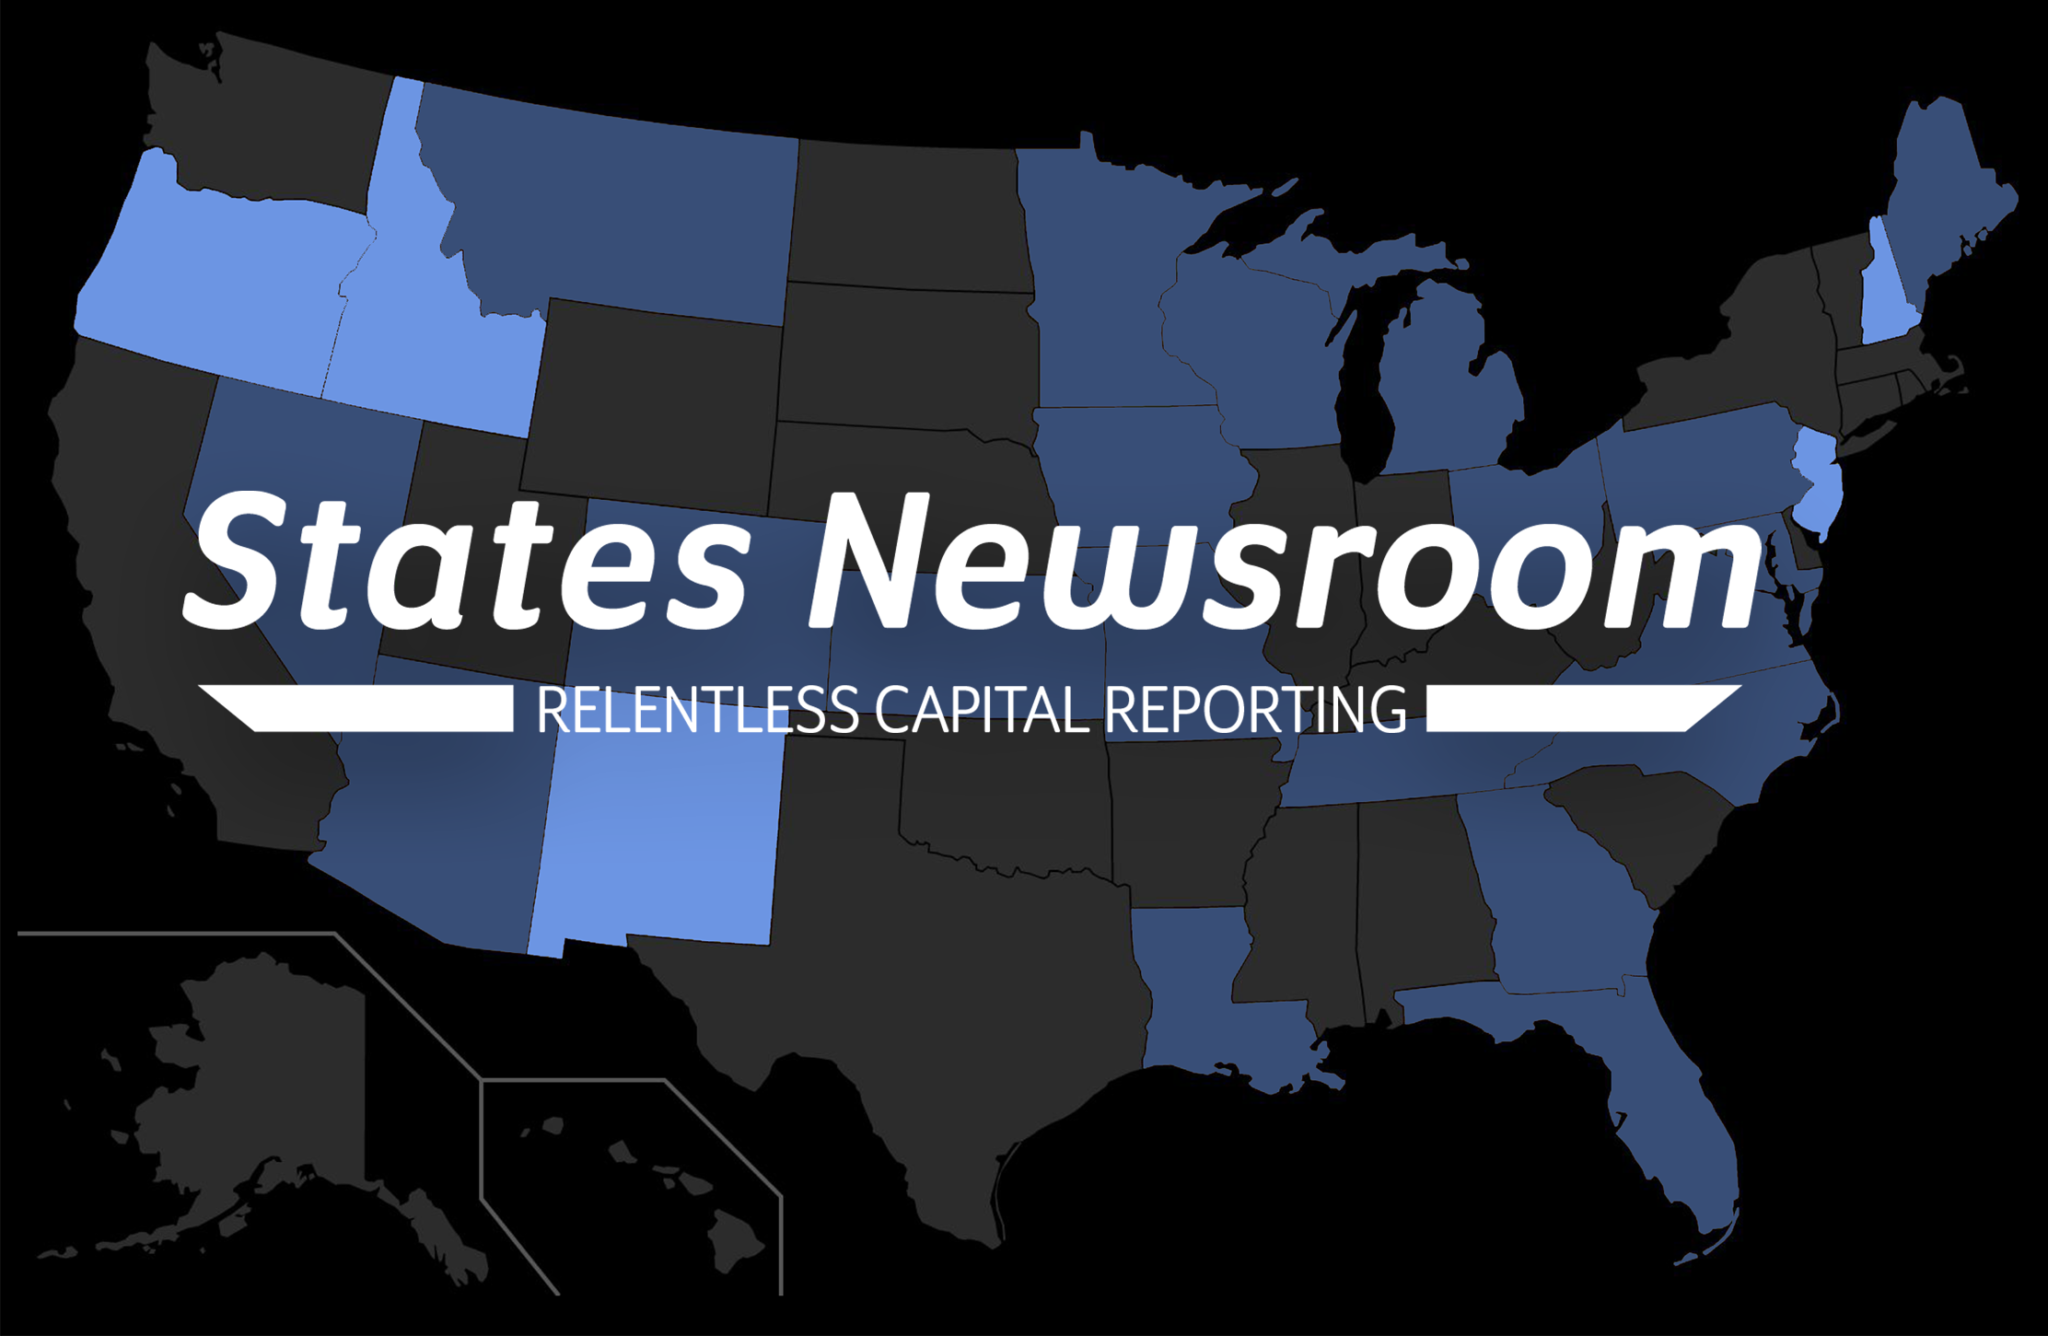 Where state and local coverage are actually expanding